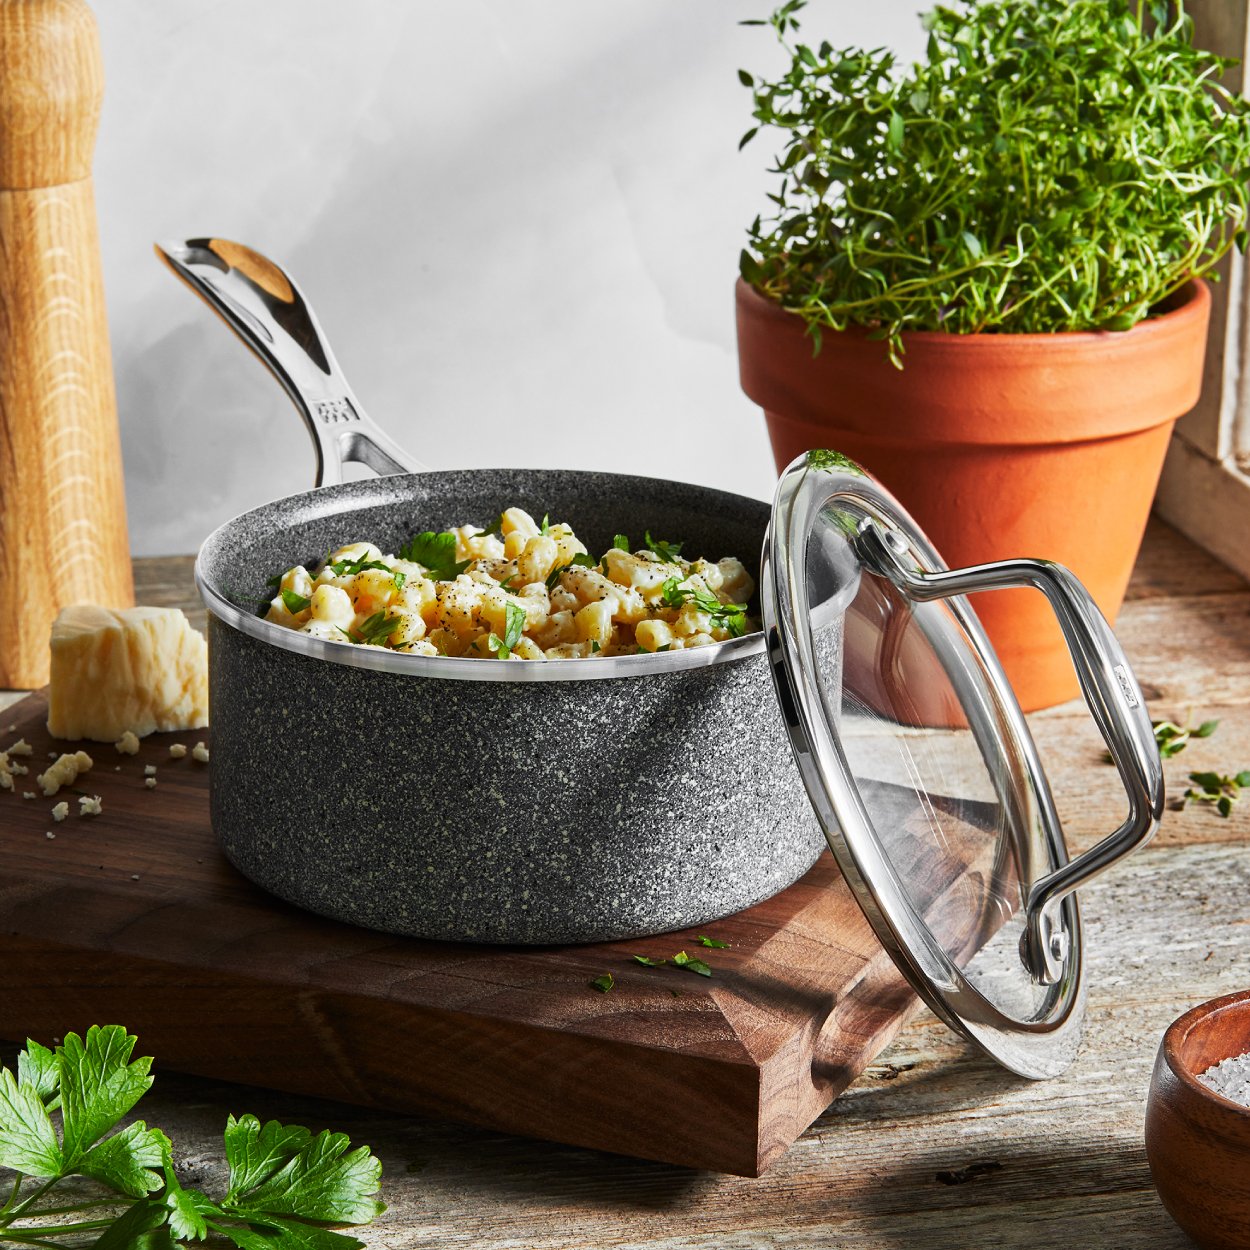 https://www.zwilling.com/on/demandware.static/-/Sites-zwilling-us-Library/default/dw5a4d5111/images/product-content/masonry-content/zwilling/cookware/vitale/ZW_VITALE_600-600_3.jpg